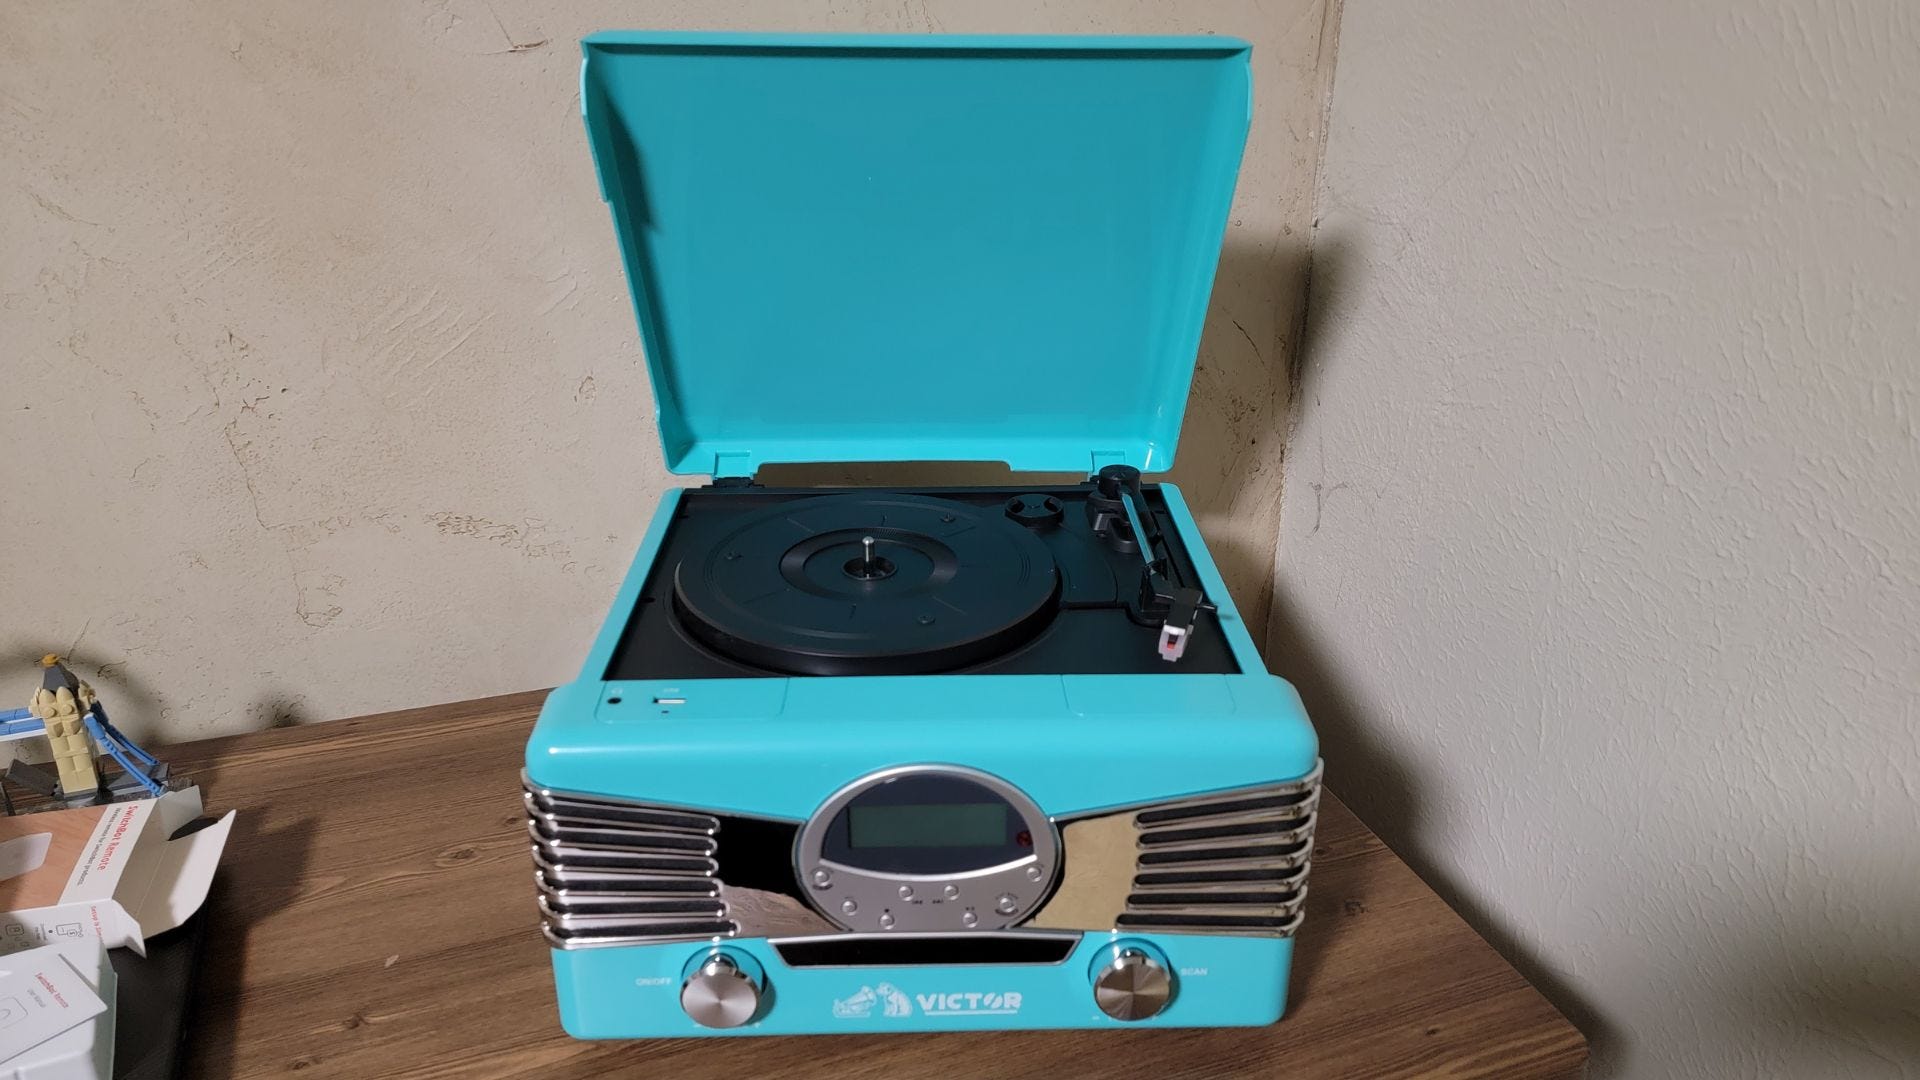 Turquoise Diner Record Player by Victor Audio sitting on desk with lifted lid